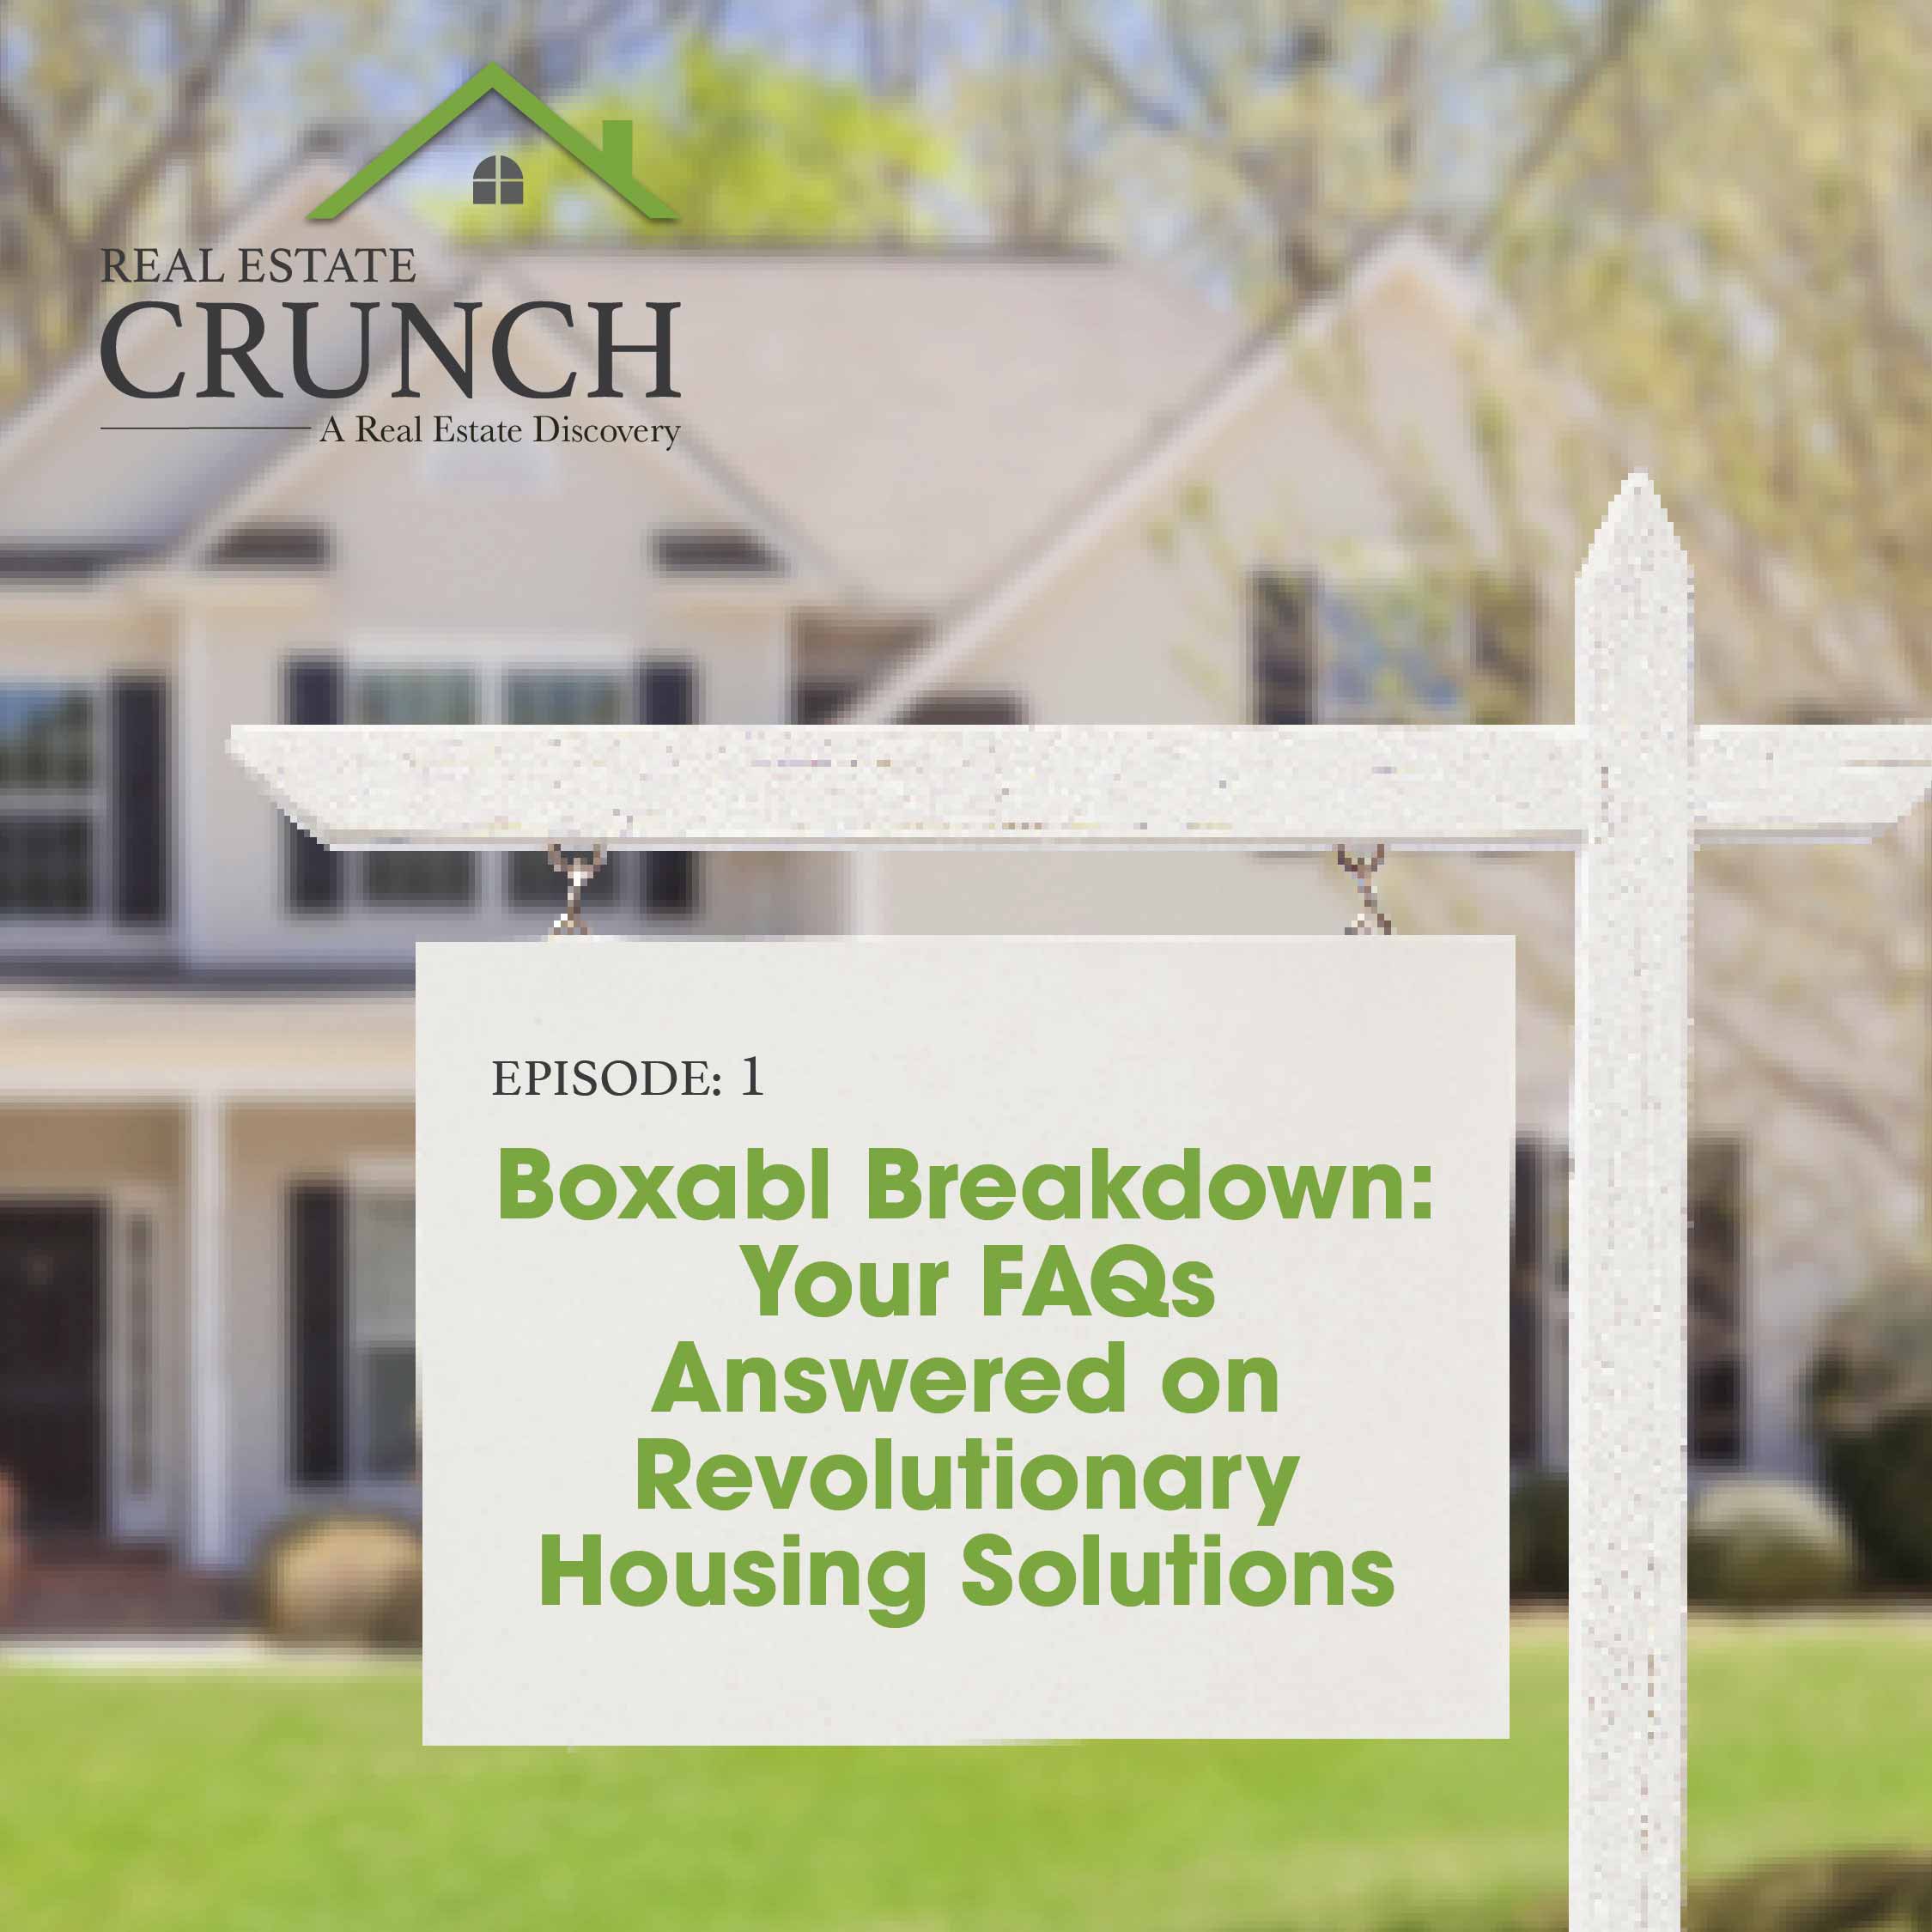 Boxabl Breakdown: Your FAQs Answered on Revolutionary Housing Solutions